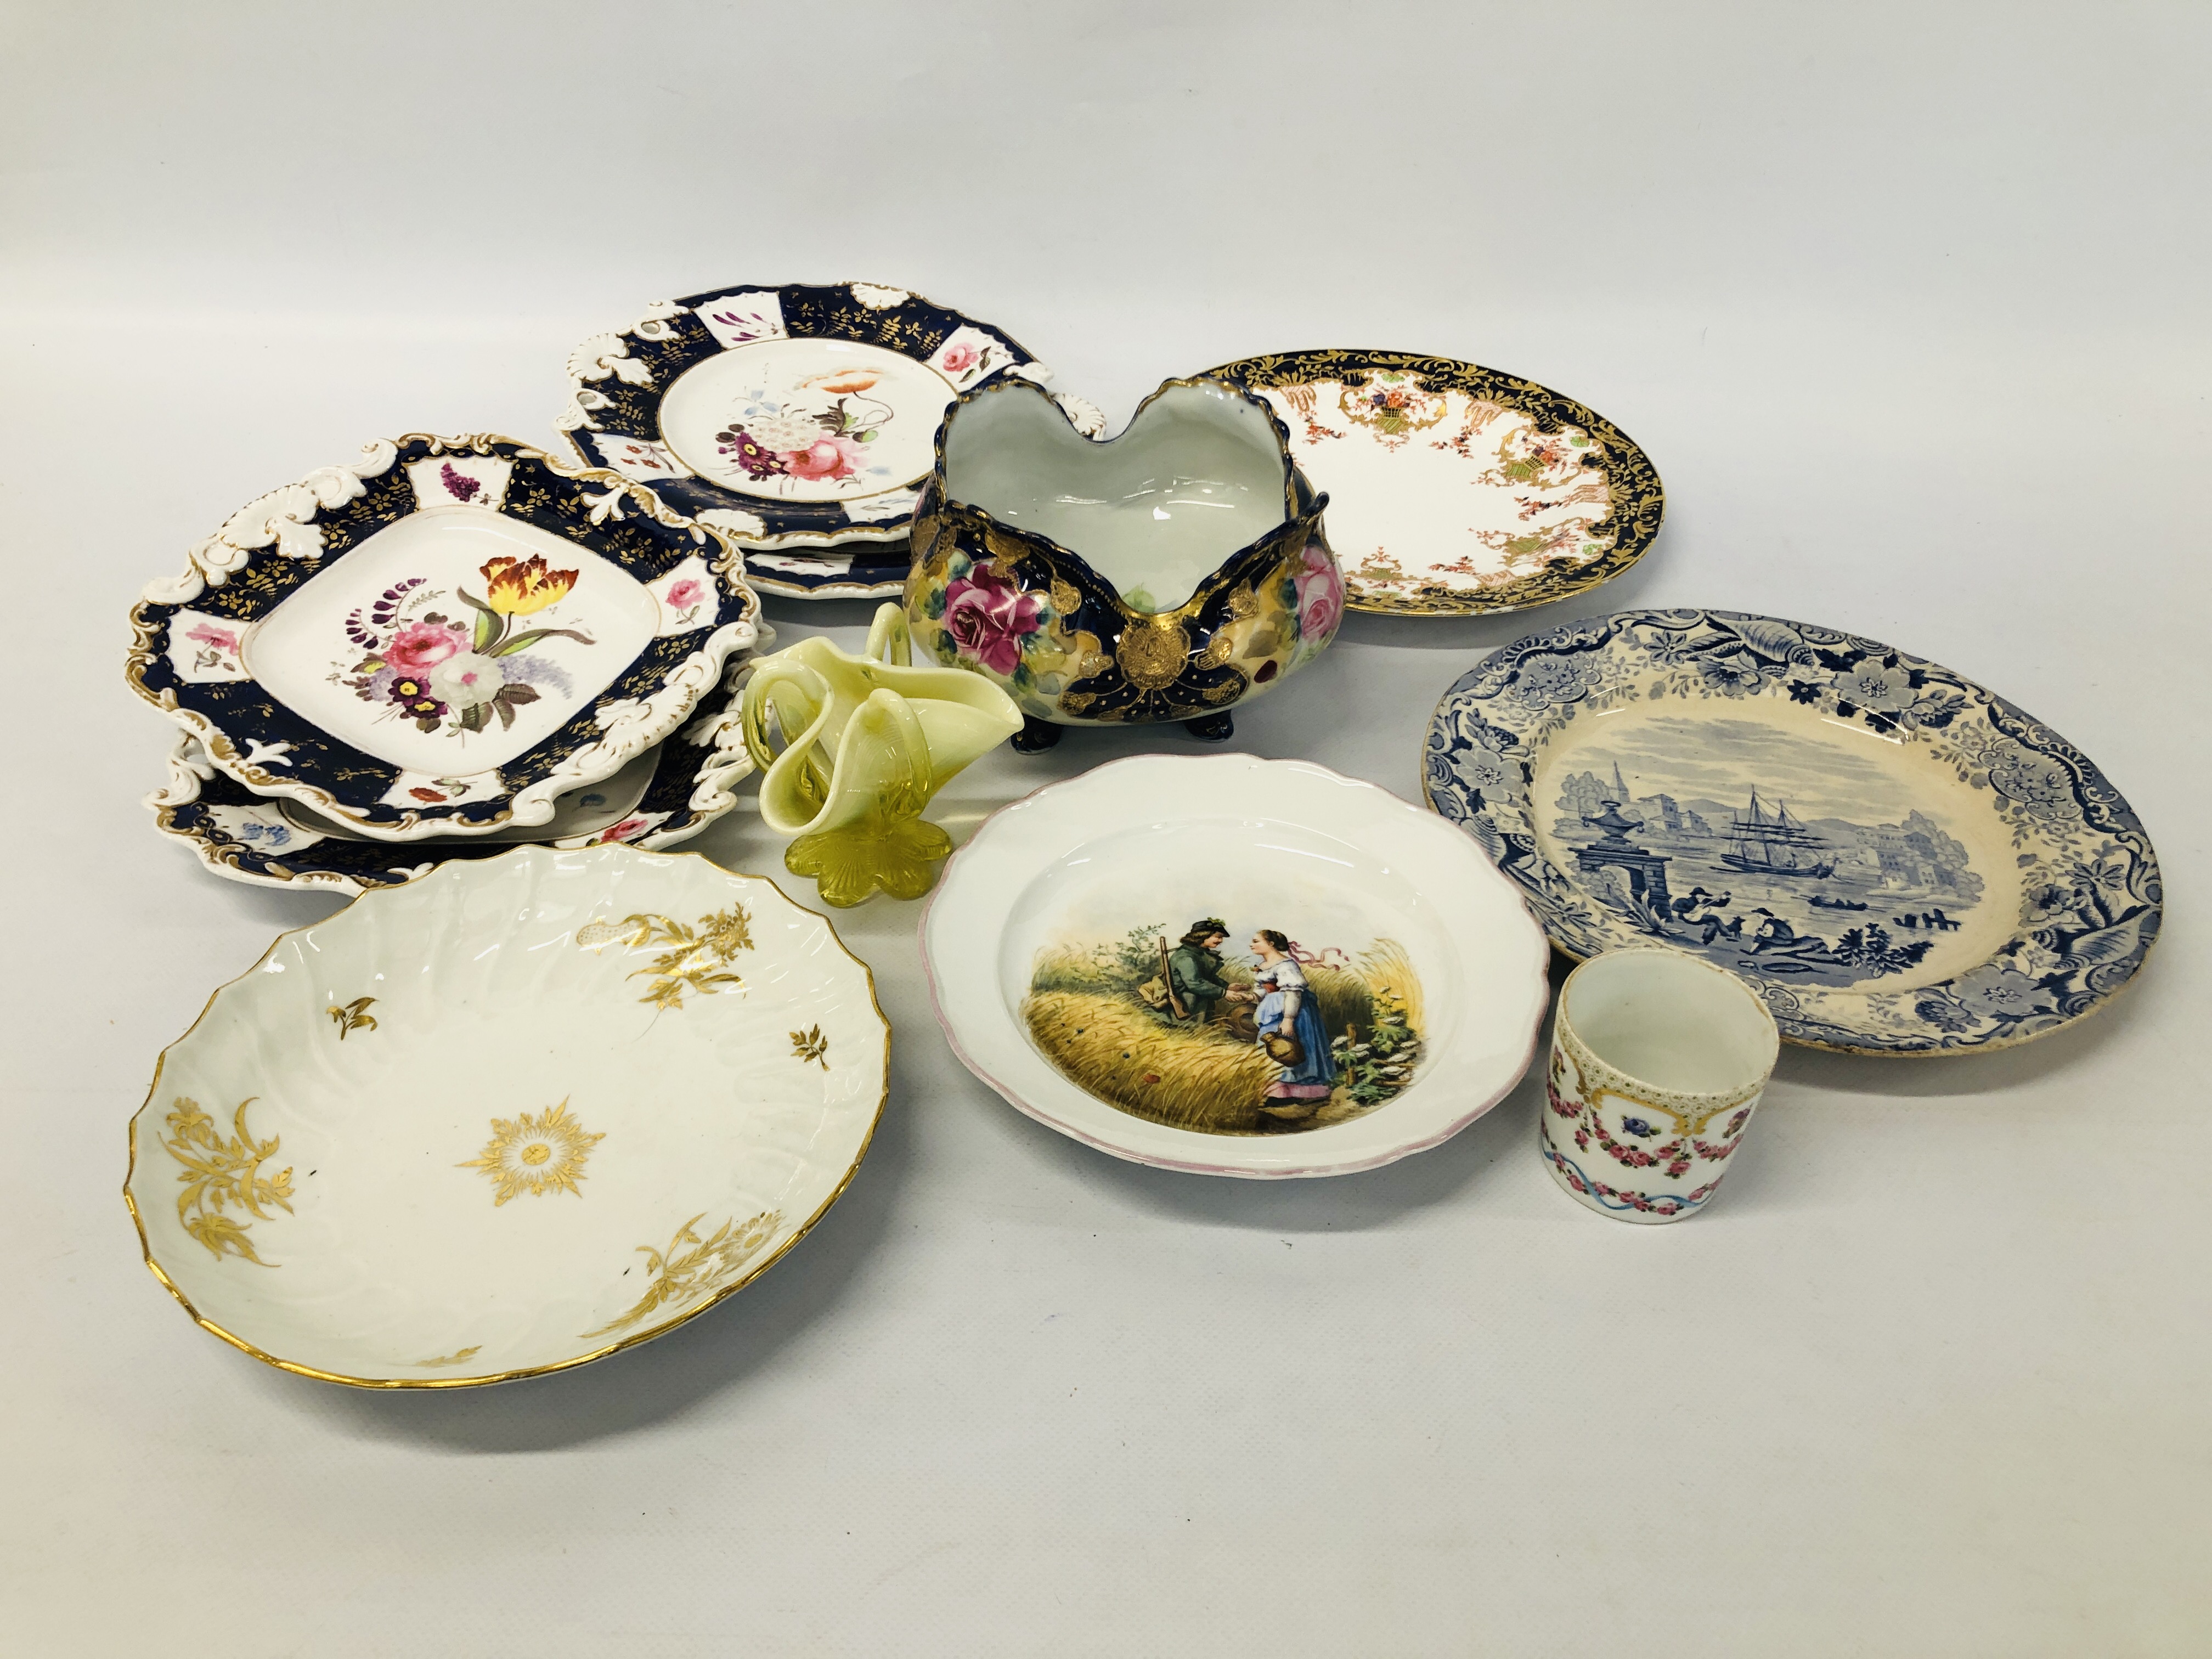 COLLECTION OF PERIOD PLATES TO INCLUDE A SET OF 4 HANDPAINTED FLORAL PATTERN PLATES "3090",